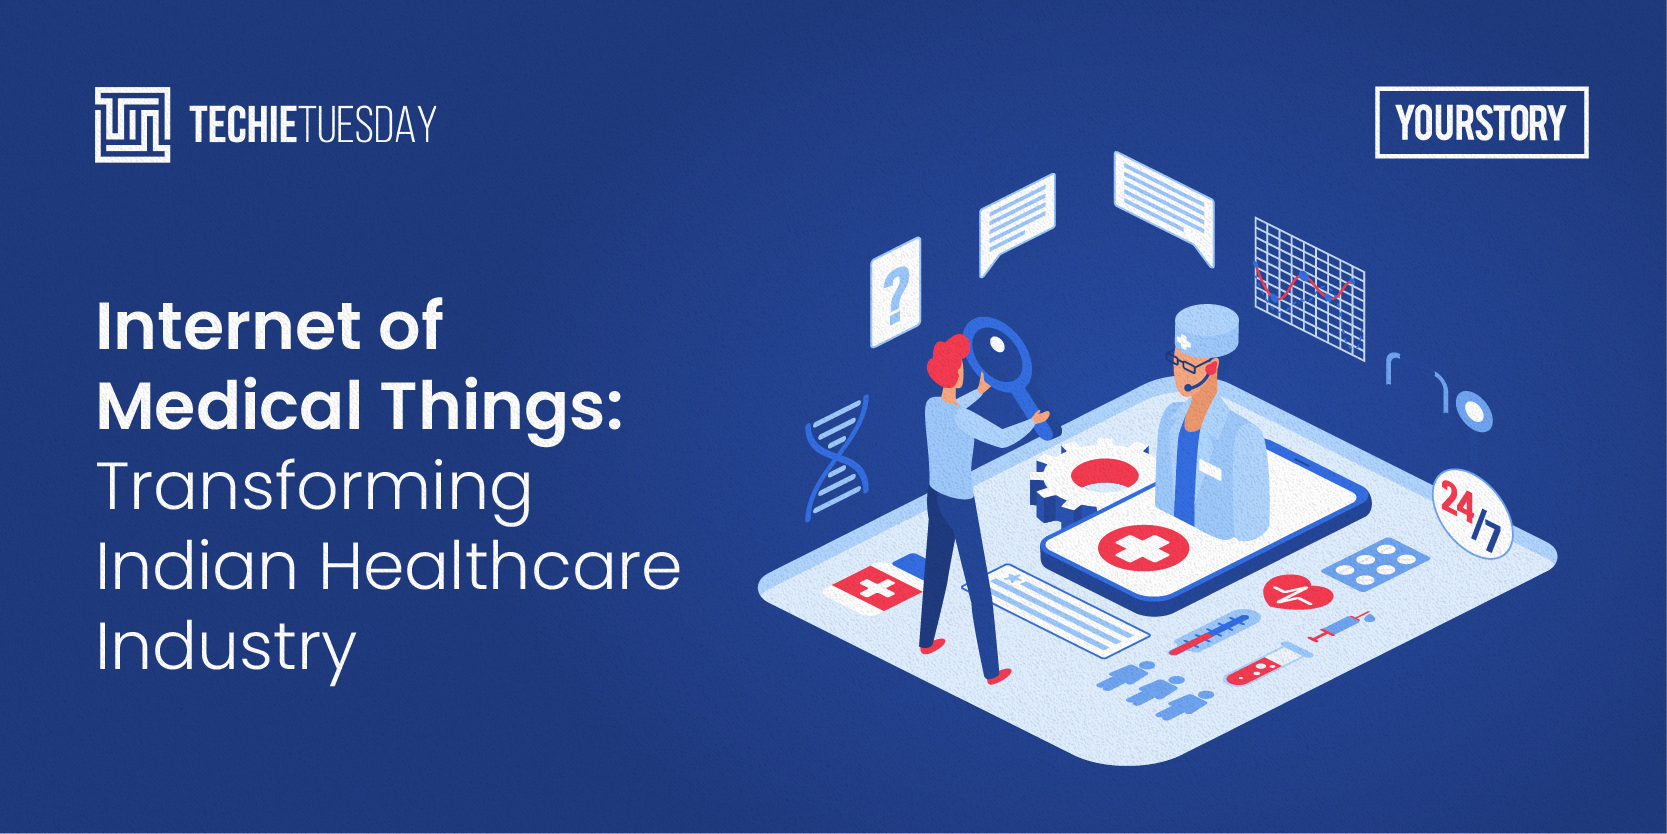 [Techie Tuesday] Internet of Medical Things: Transforming Indian Healthcare Industry

